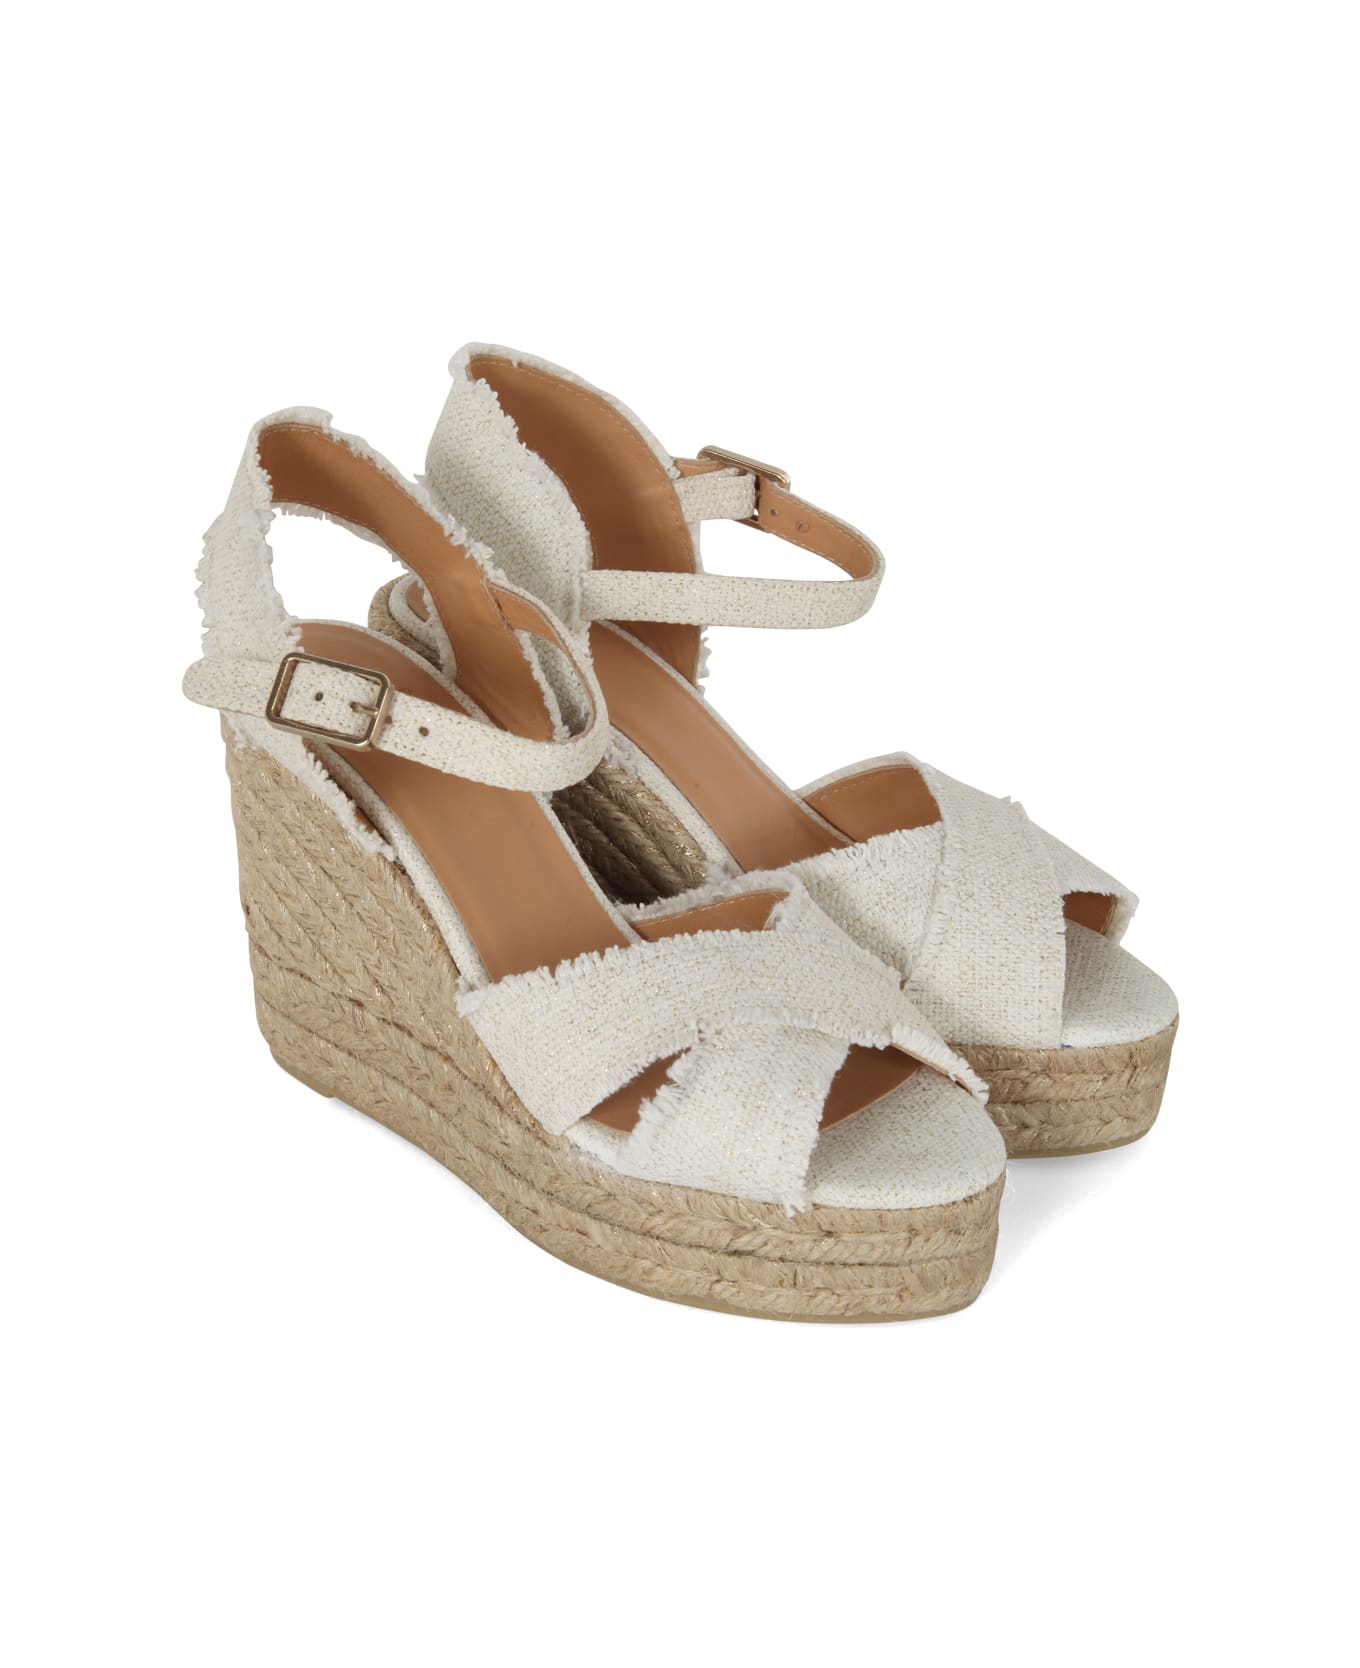 Castañer Bromelia Espadrilles With Belt On Ankles And Fringed Ankles - White Gold サンダル